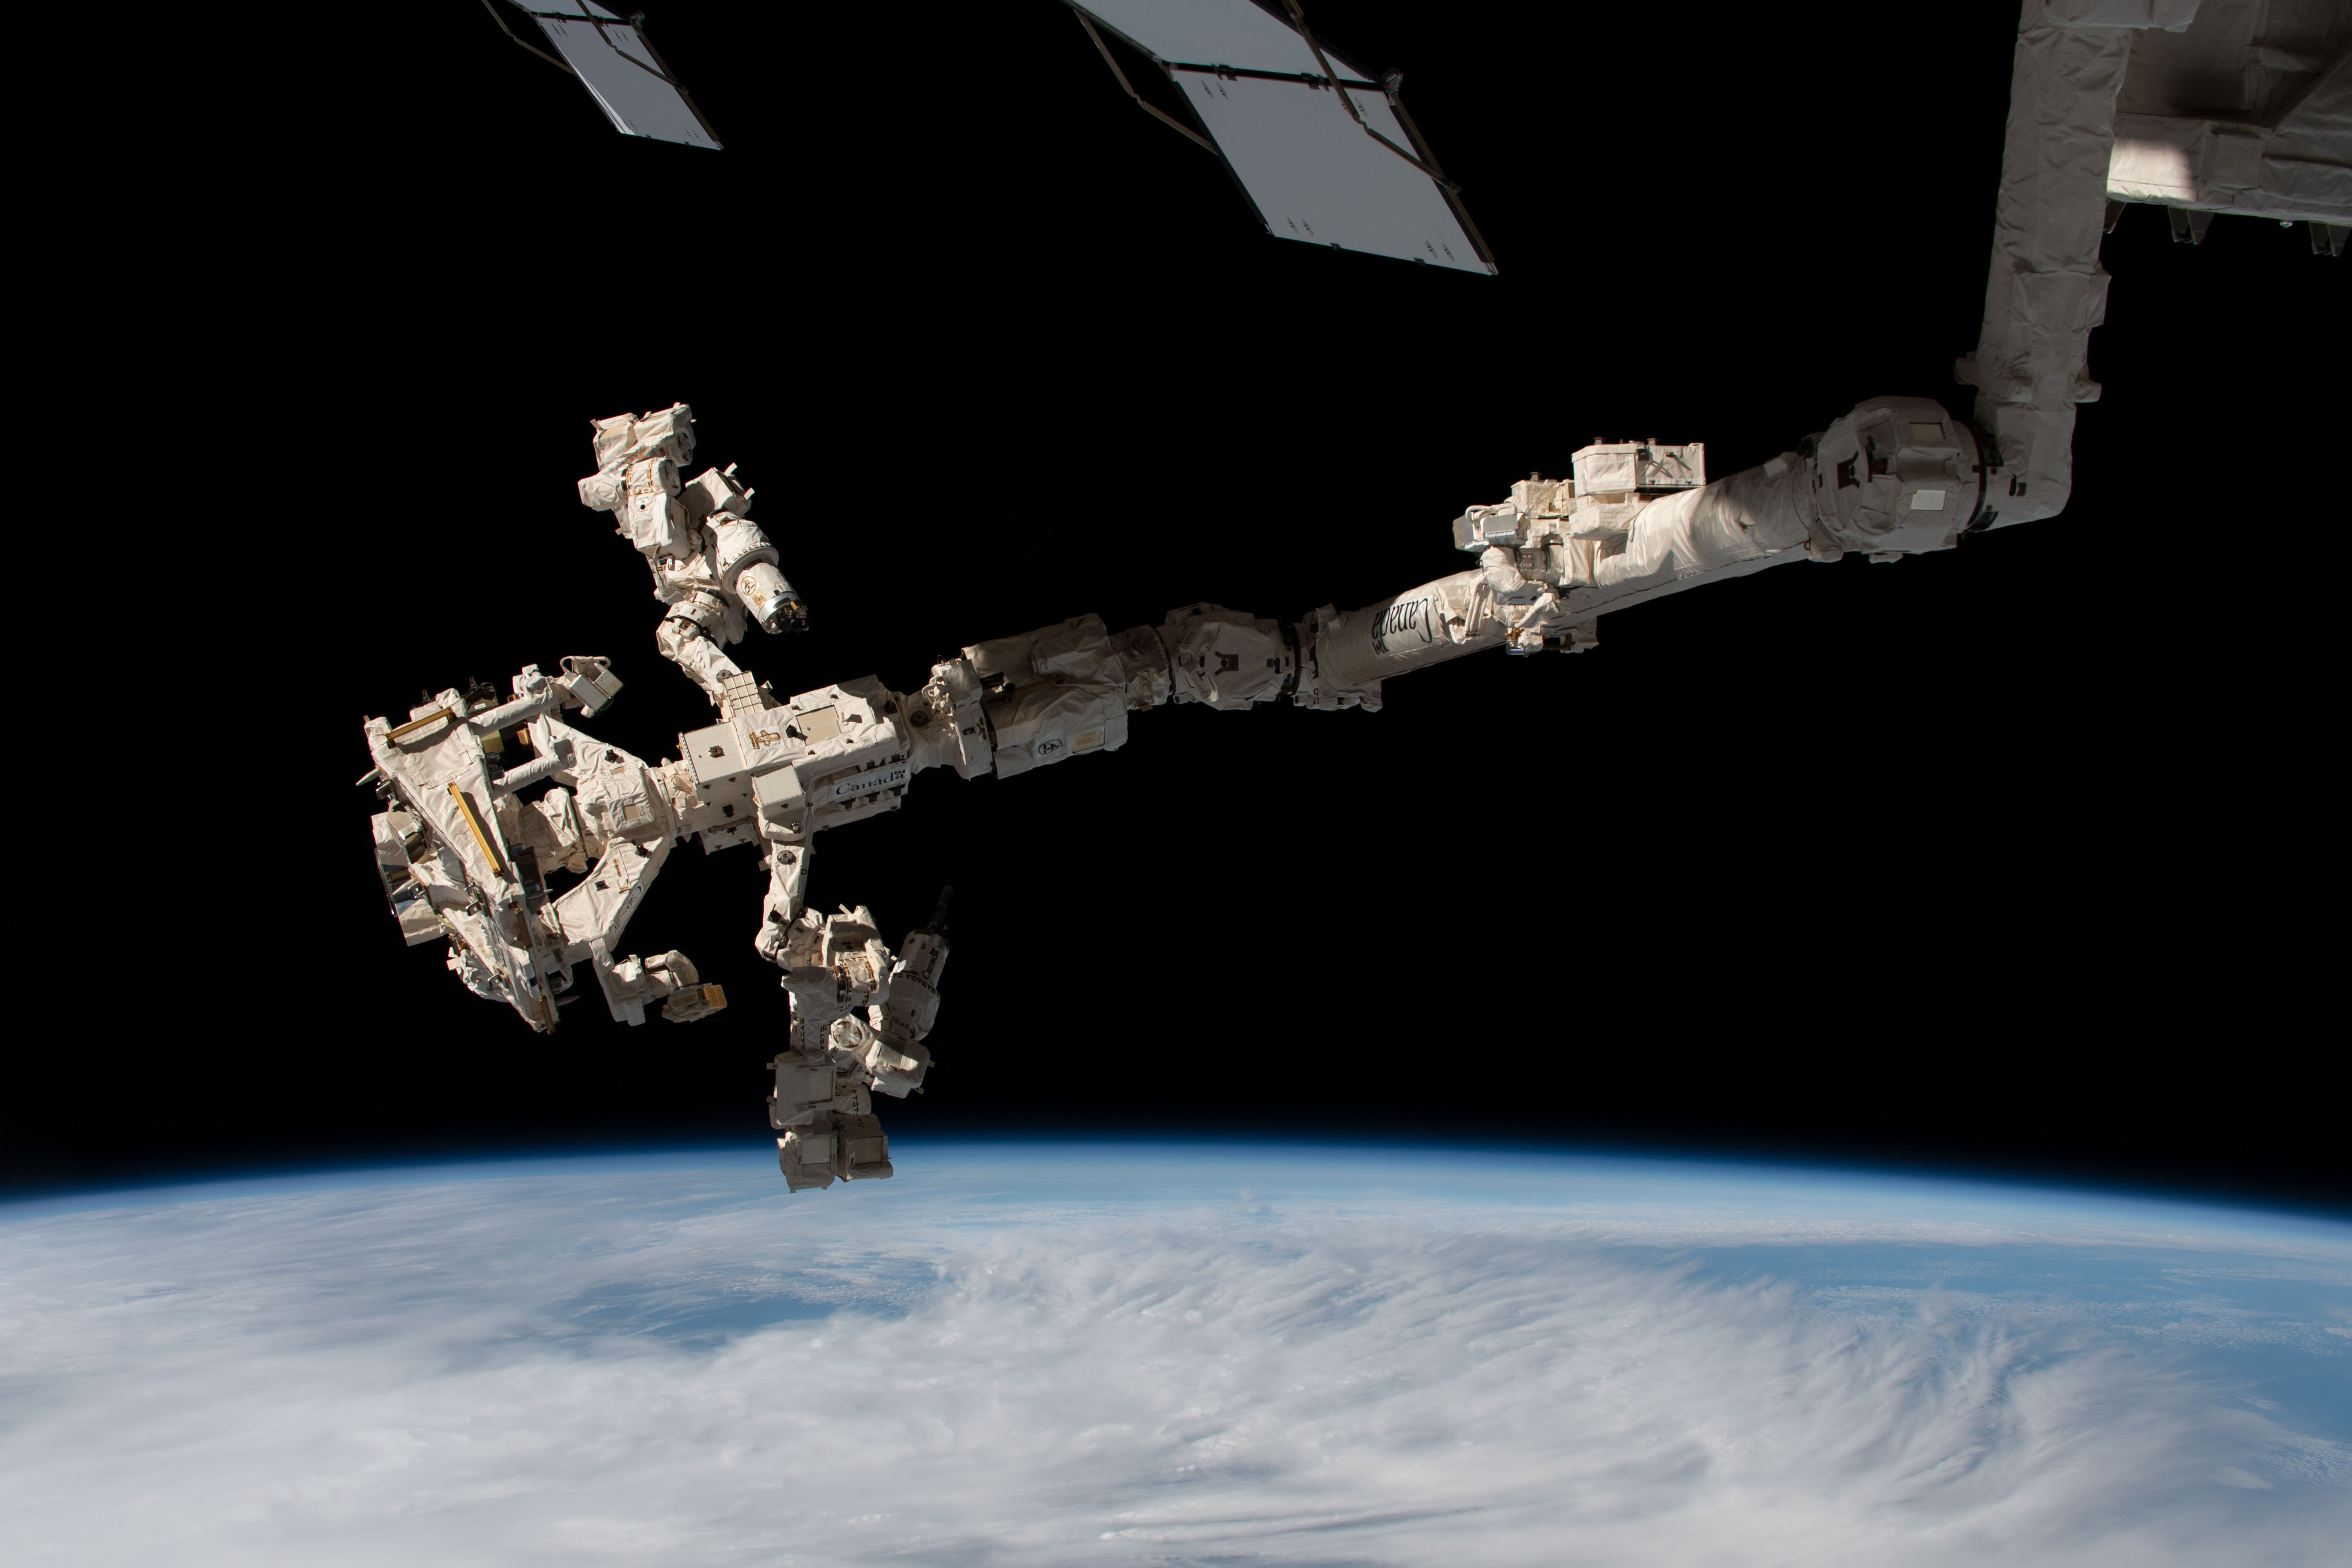 Dextre, the International Space Station's fine-tuned robotic hand, is pictured attached to the Canadarm2 robotic arm.